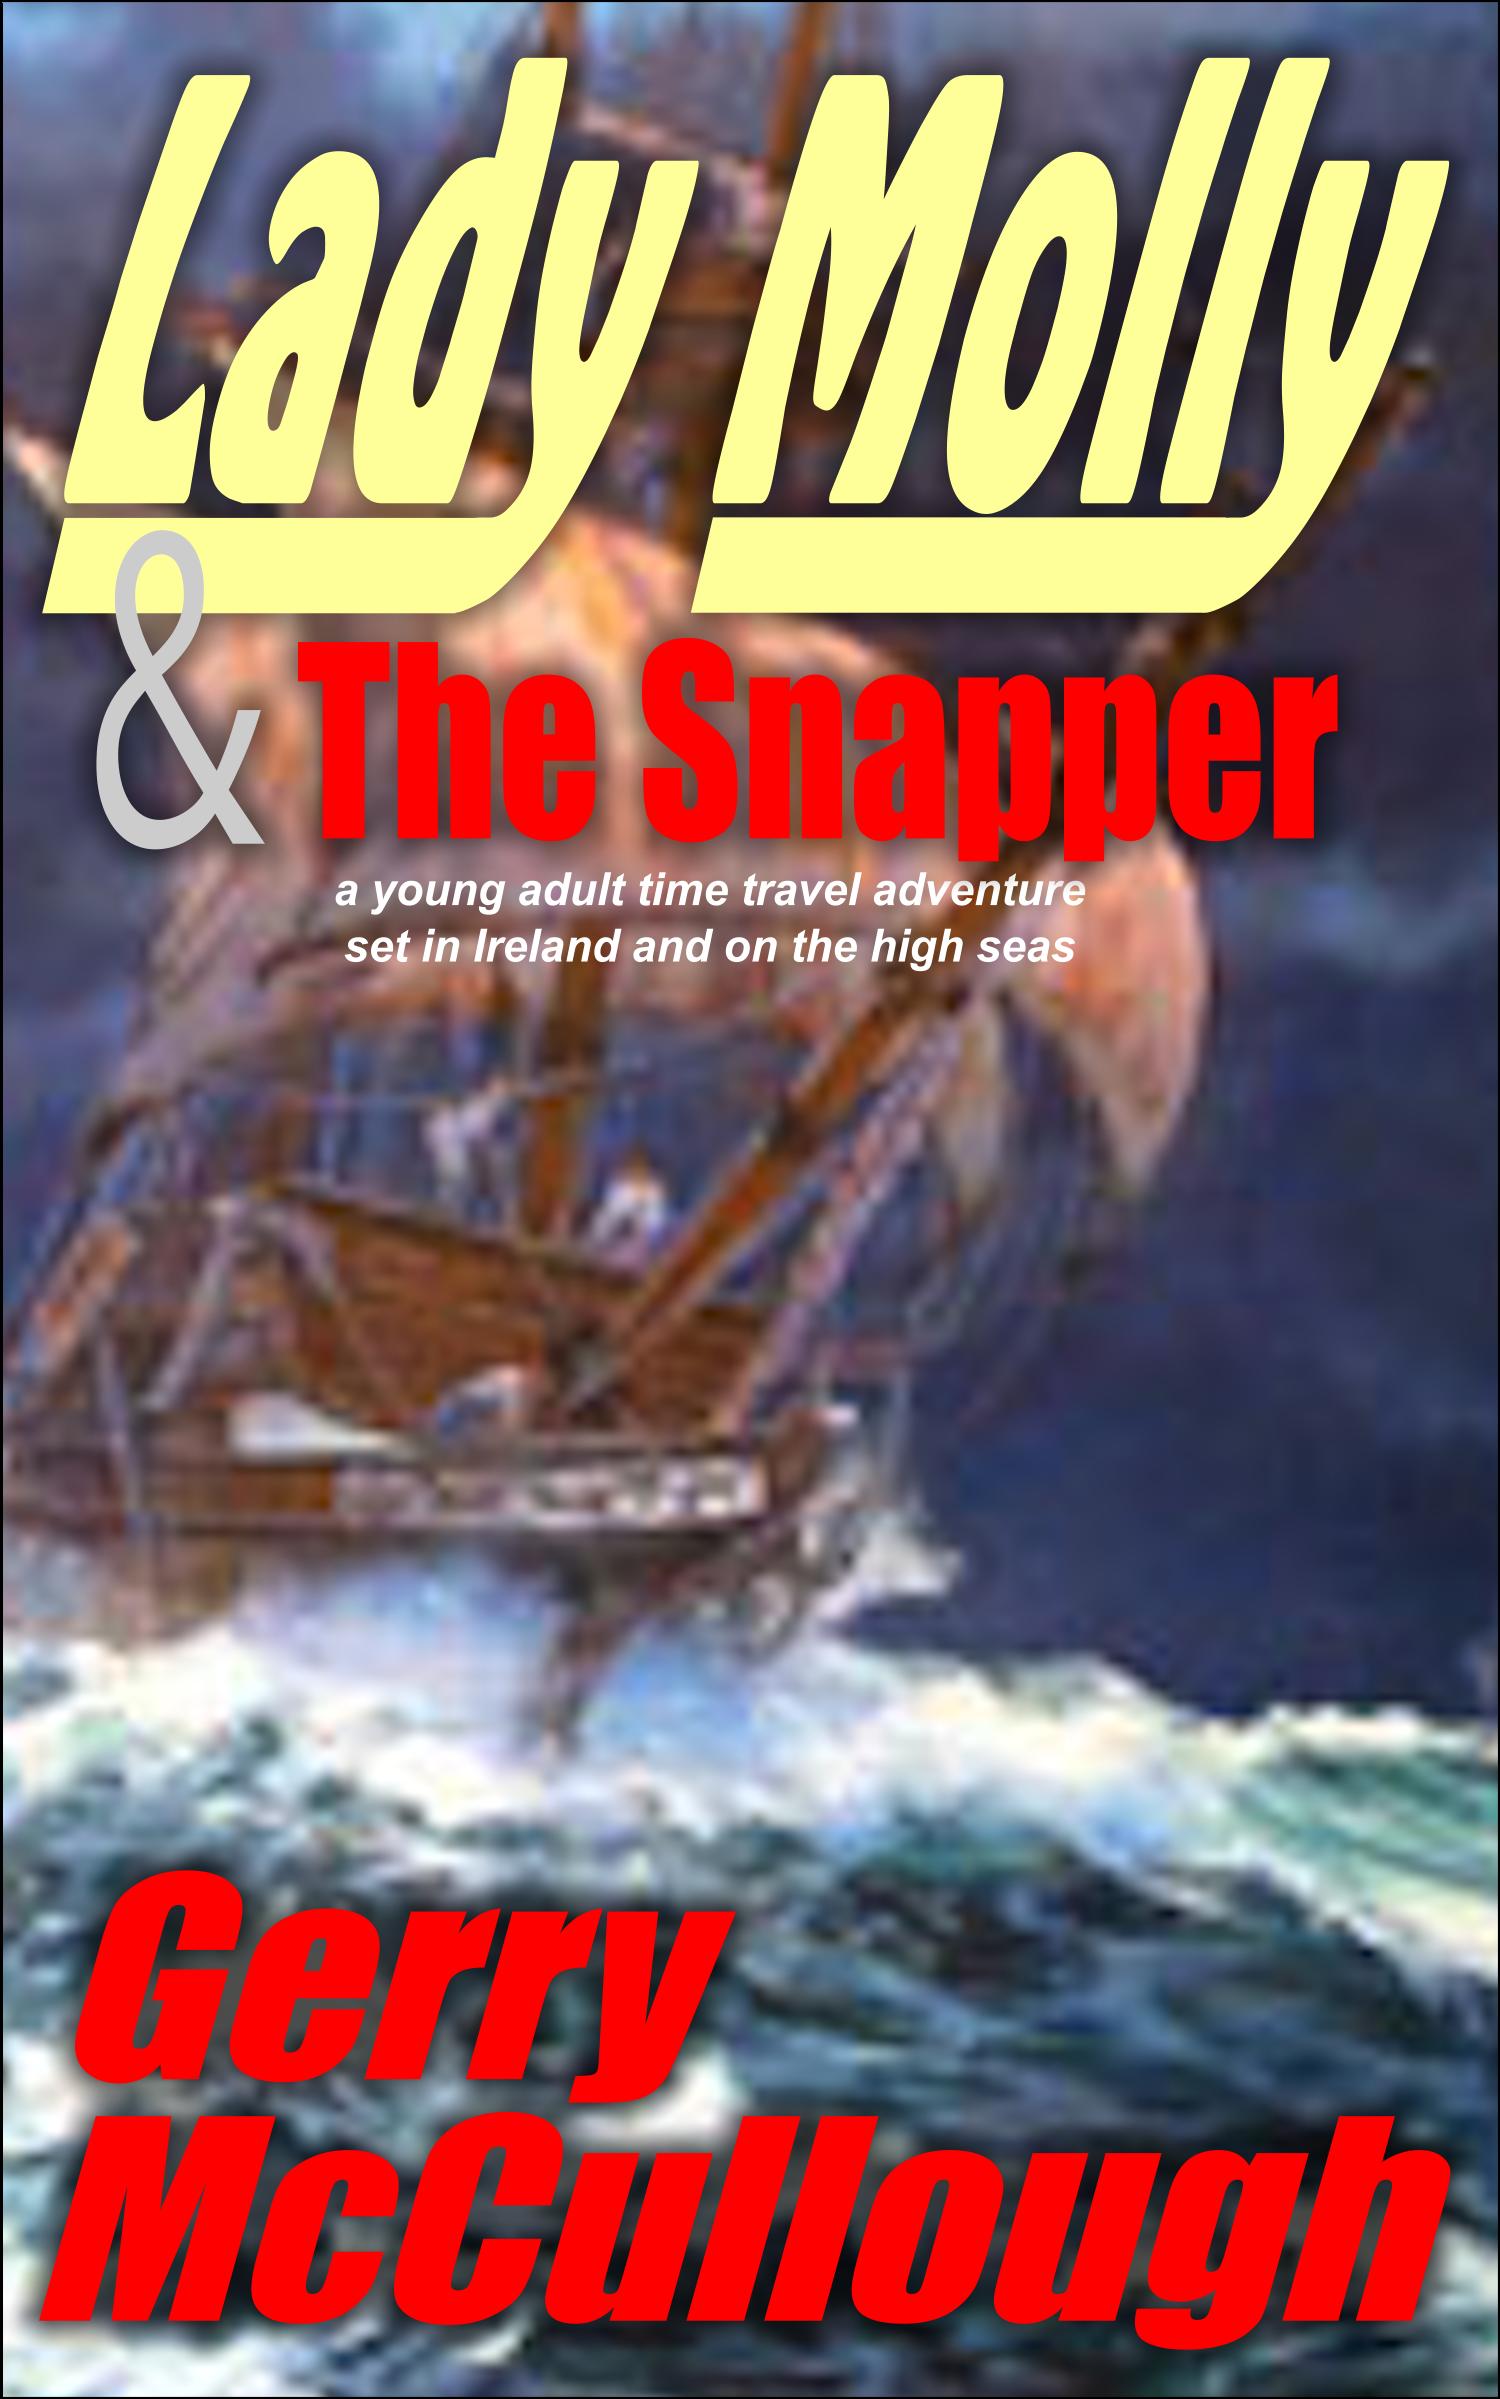 Buy 'Lady Molly & The Snapper' from Amazon & other outlets